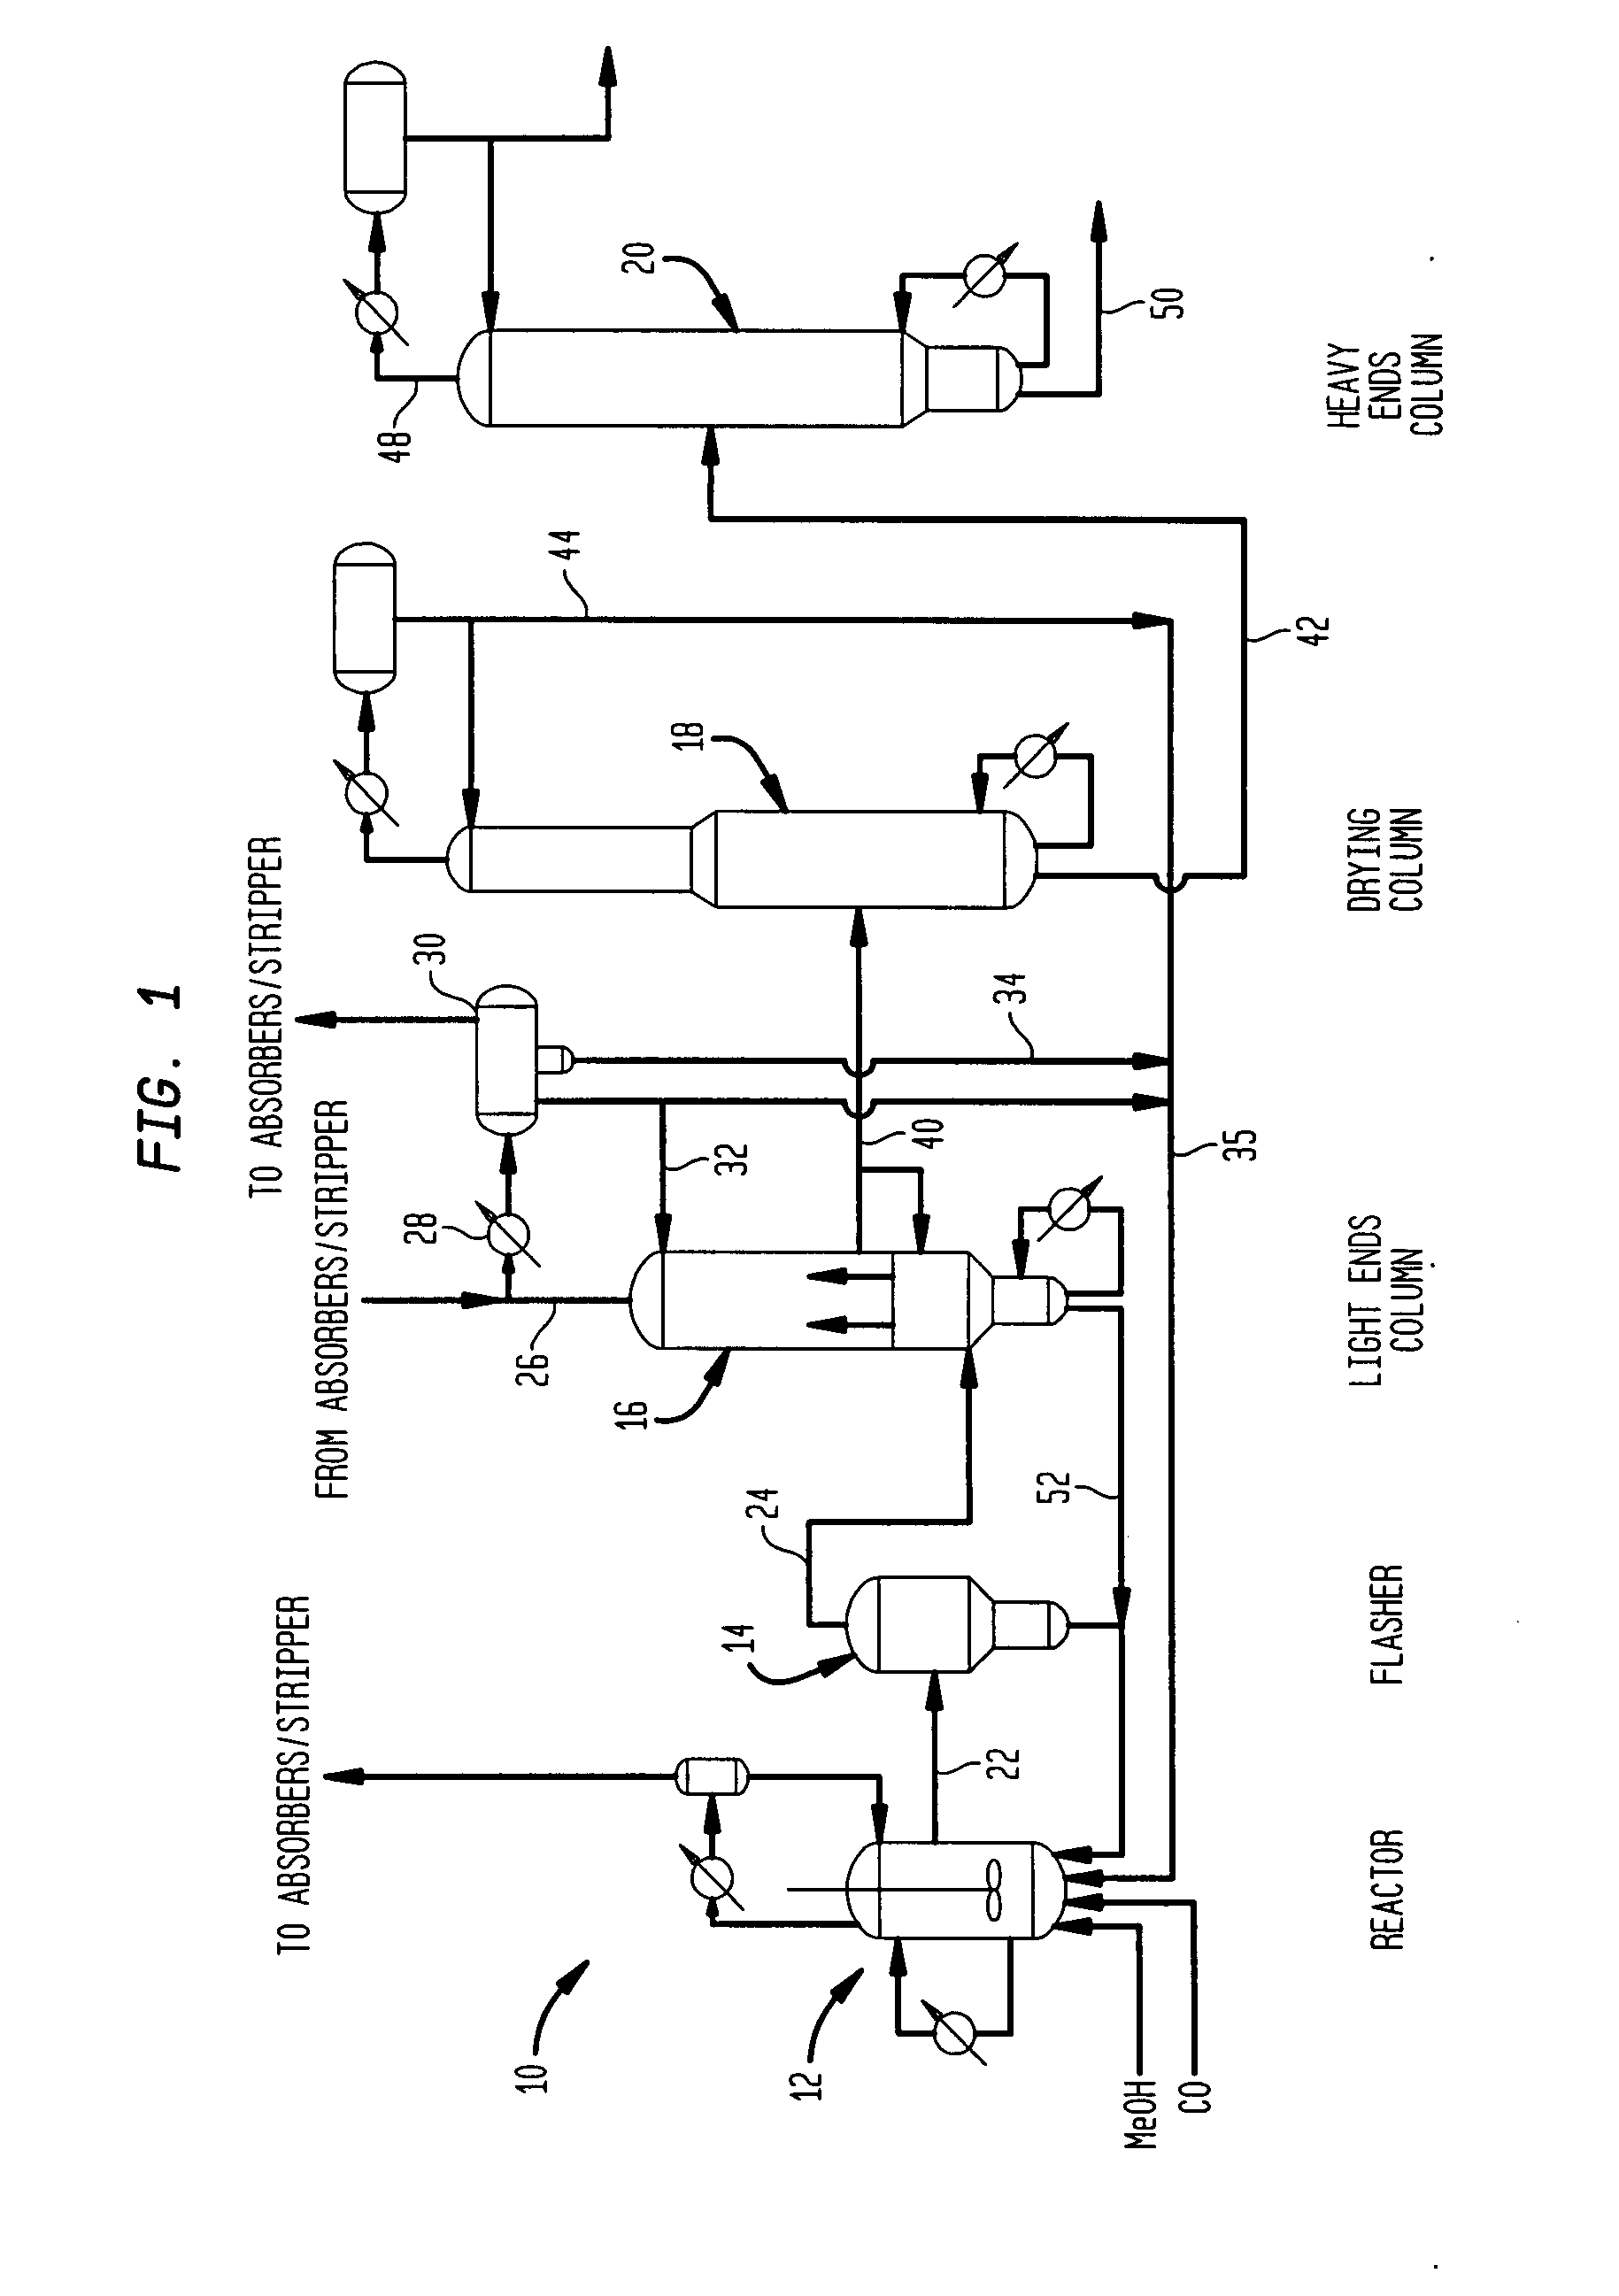 Method and apparatus for making acetic acid with improved light ends column productivity